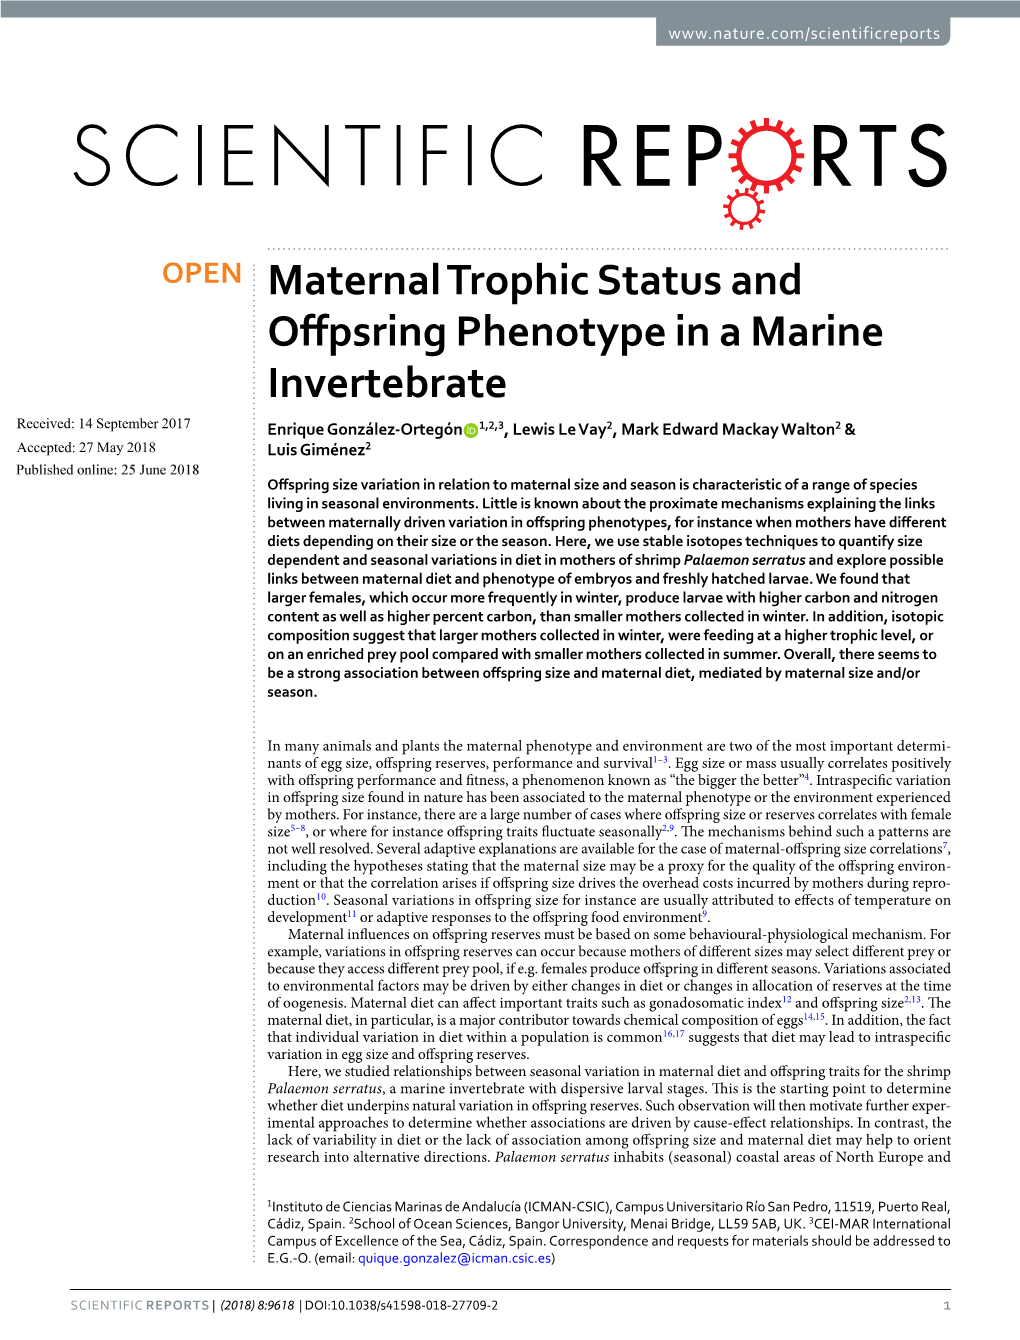 Maternal Trophic Status and Offpsring Phenotype in a Marine Invertebrate